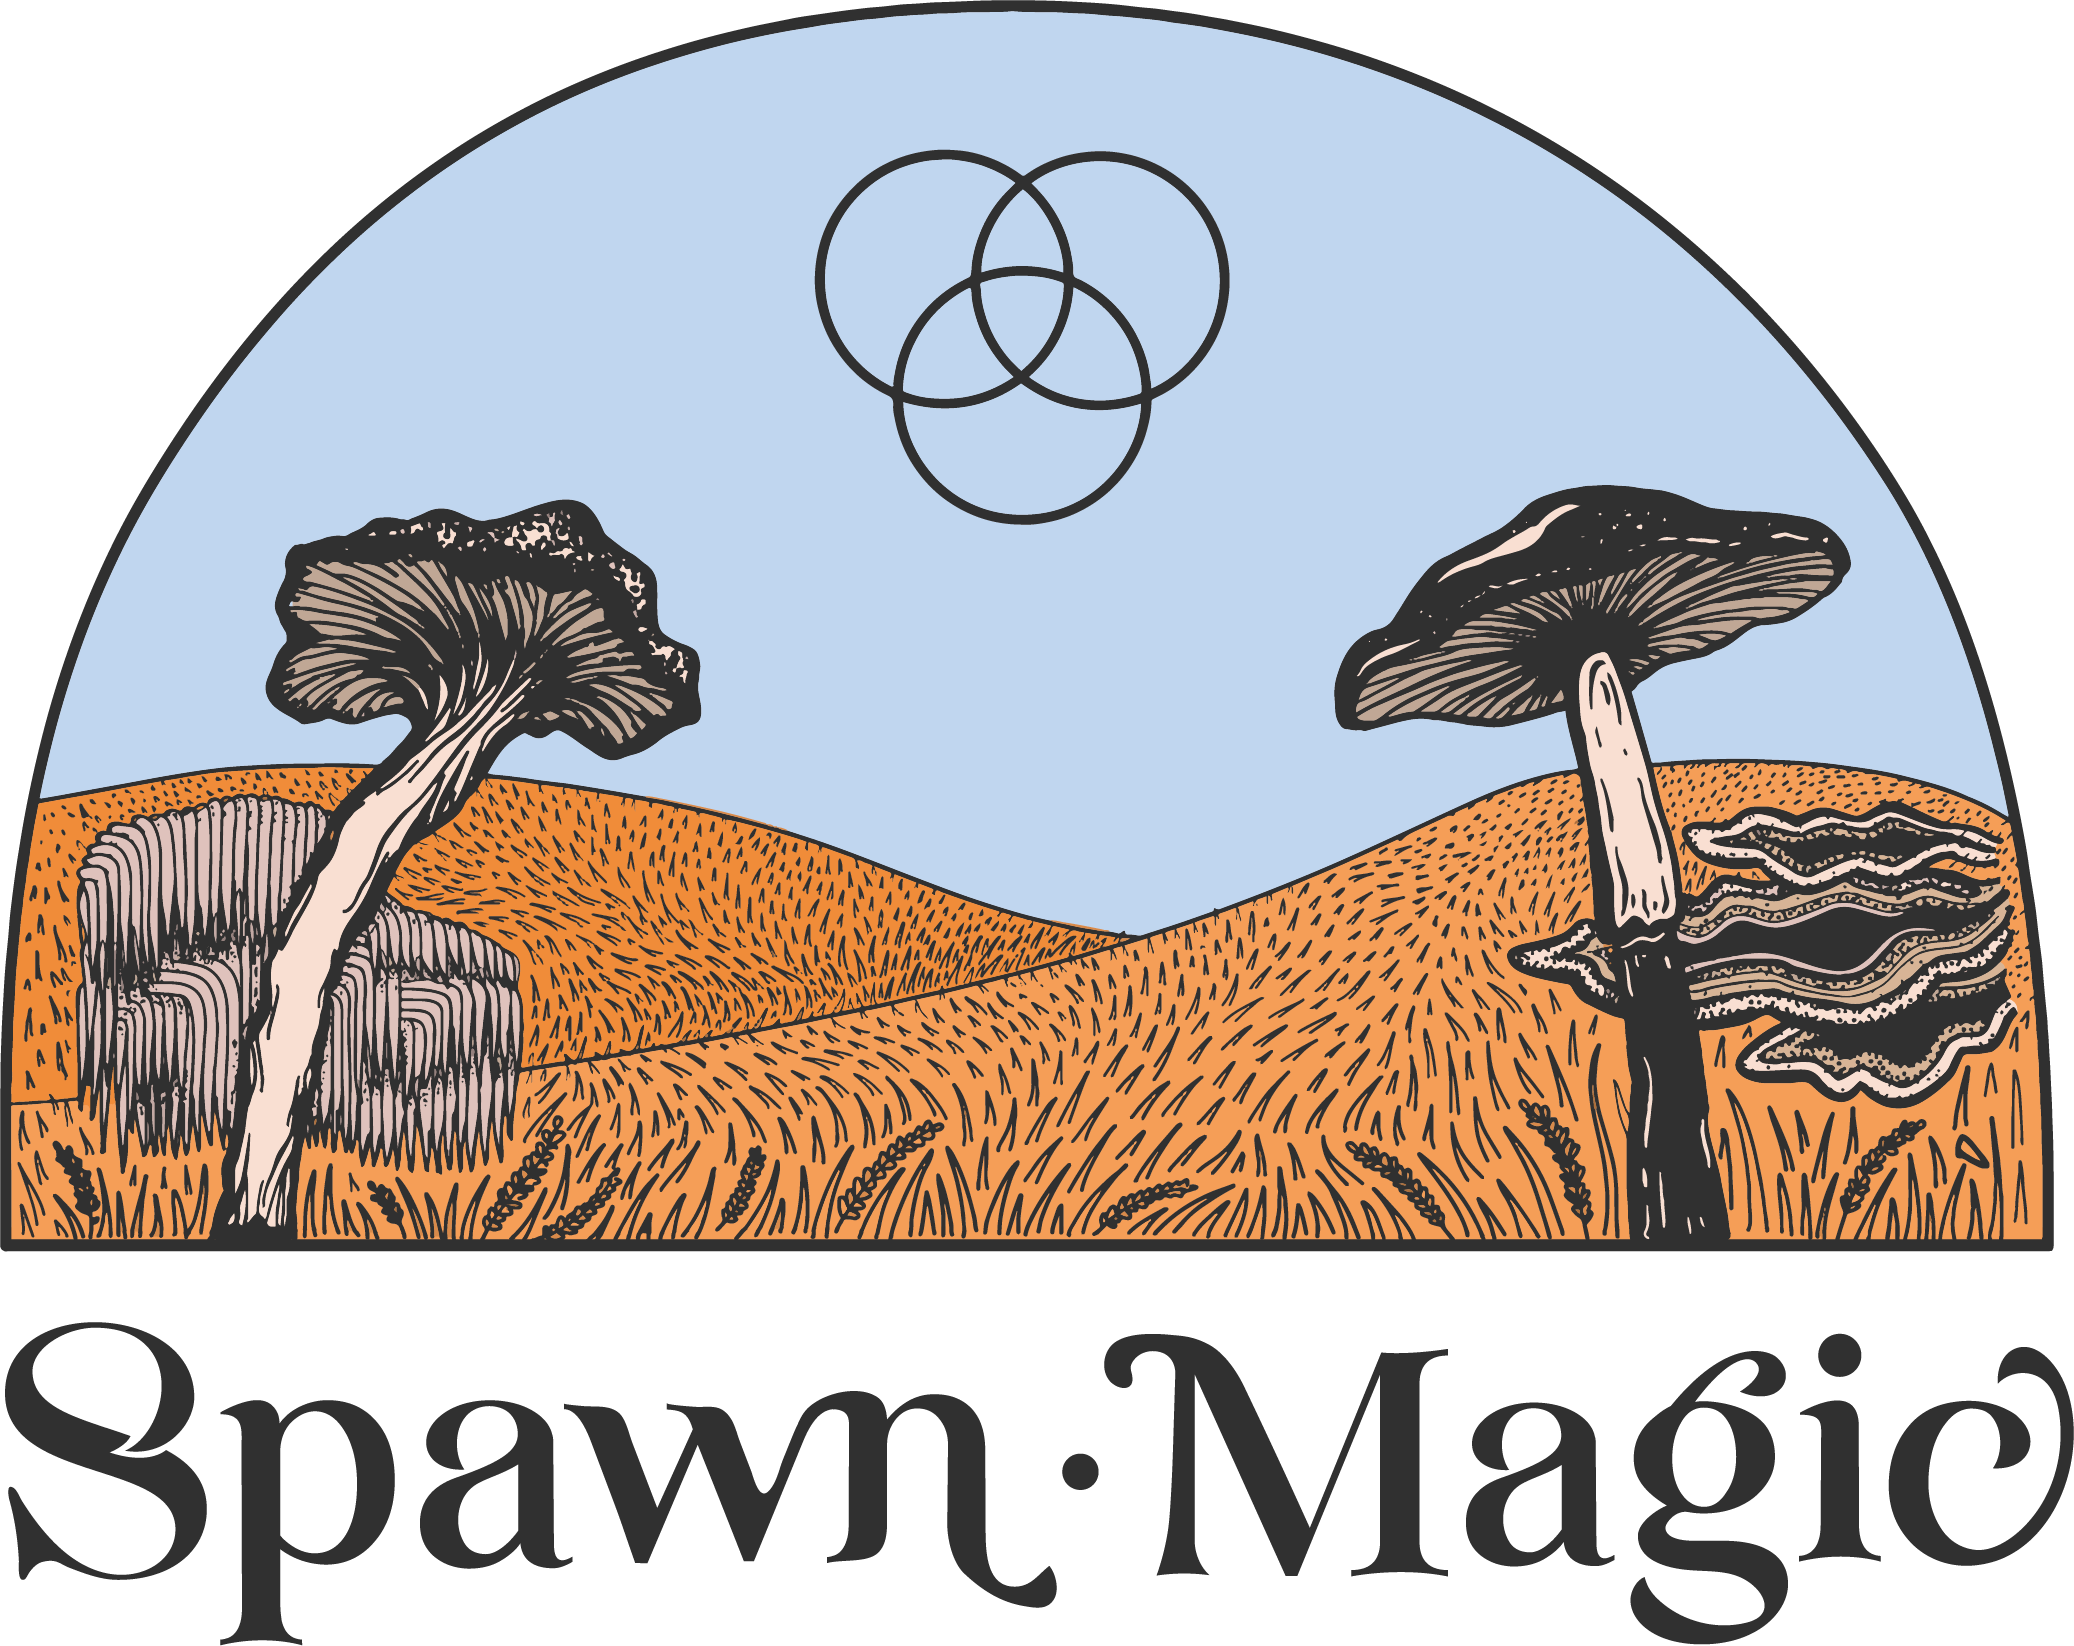 Spawn Magic full color logo with mushrooms on a hillside and a trifecta in the sky